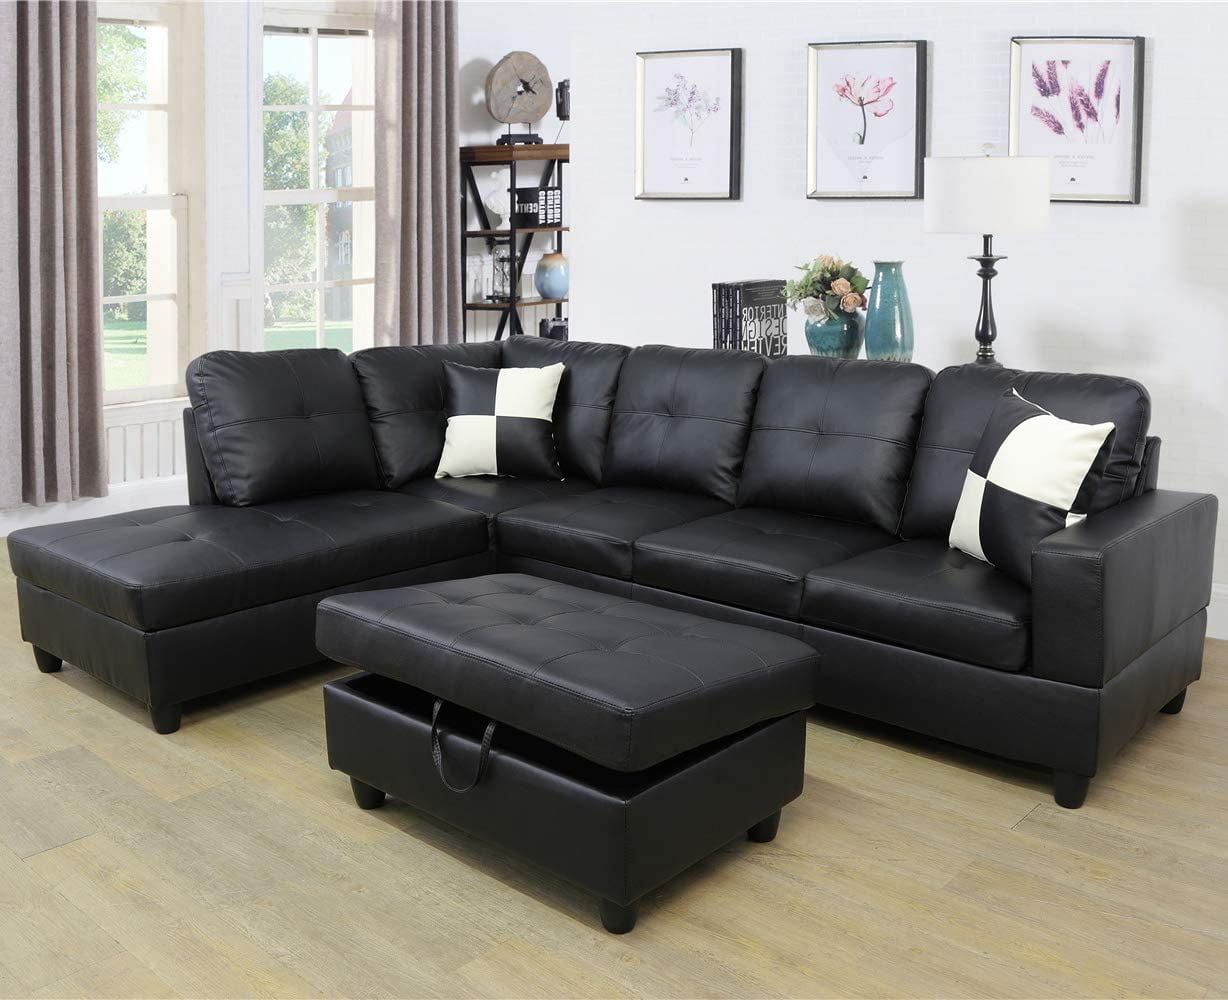 Gcf Faux Leather 3 Piece Sectional Sofa Couch Set, L Shaped Modern Sofa  With Chaise Storage Ottoman And Pillows For Living Room Furniture, Left  Hand Facing Sectional Sofa Set Black – Walmart In 3 Piece Leather Sectional Sofa Sets (View 3 of 15)